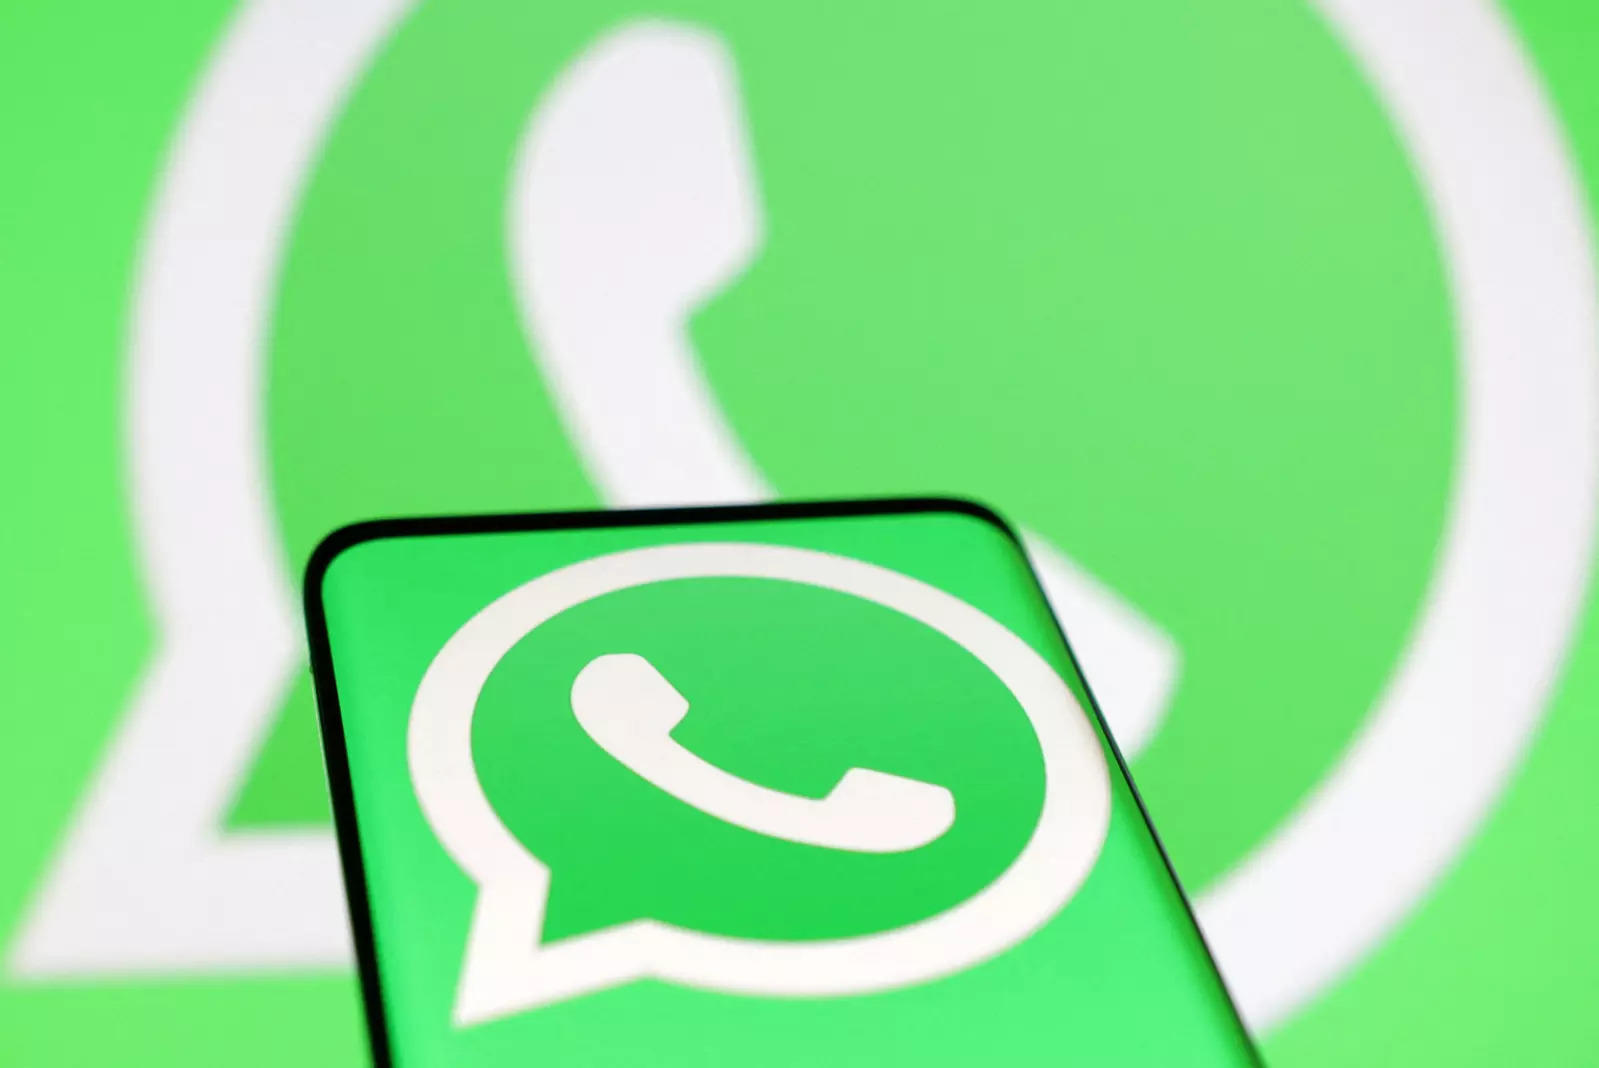 How to disable internet only from WhatsApp